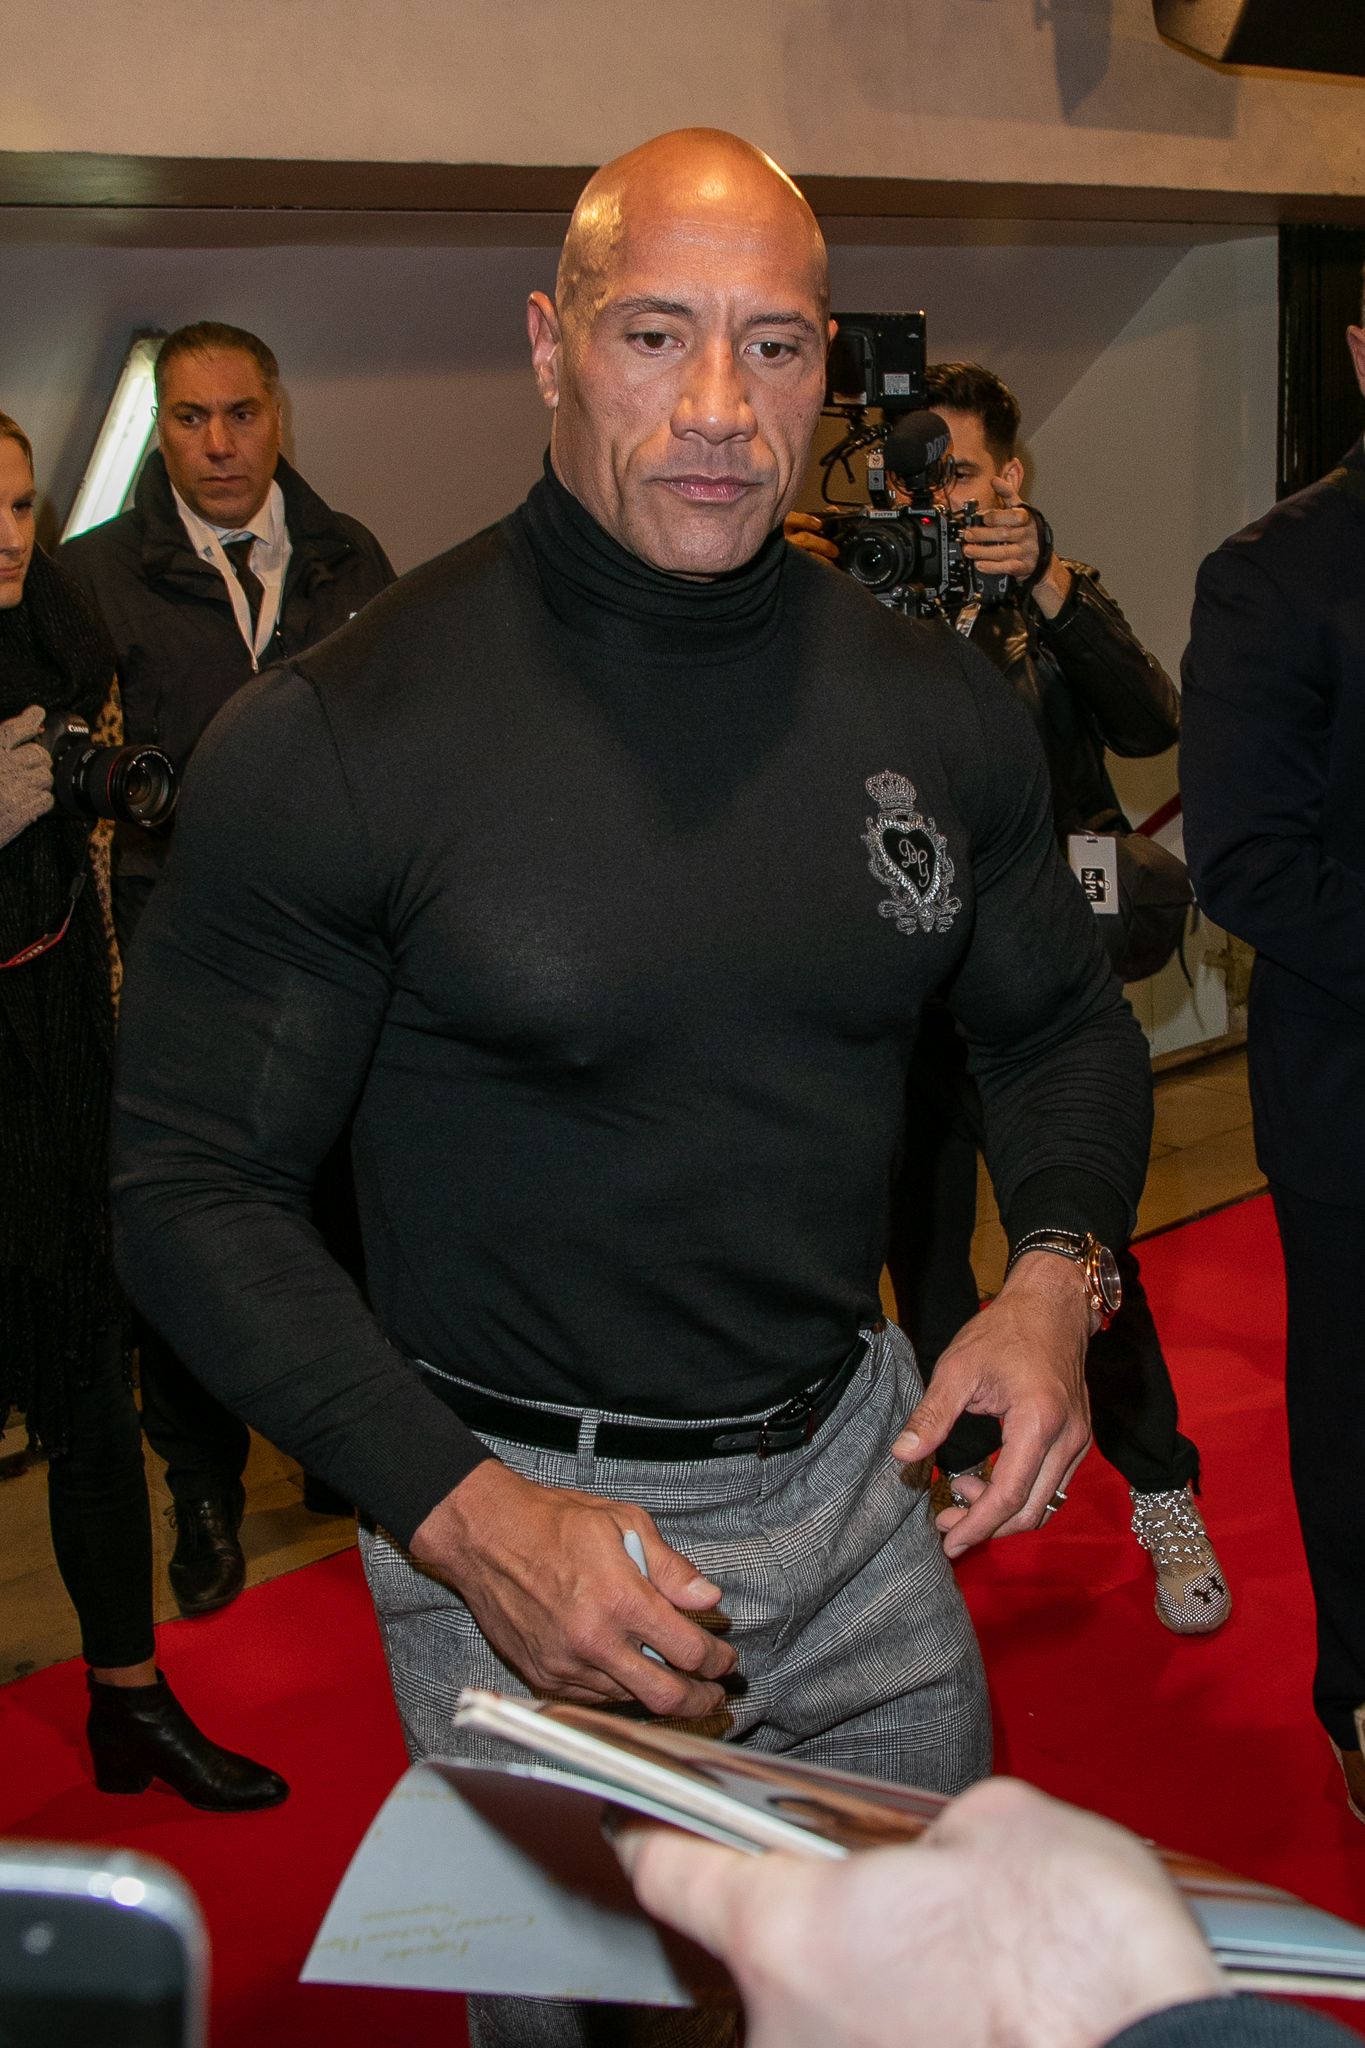 Dwayne “The Rock” Johnson at the "Jumanji” premiere on December 03, 2019, in France. | Photo: Getty Images